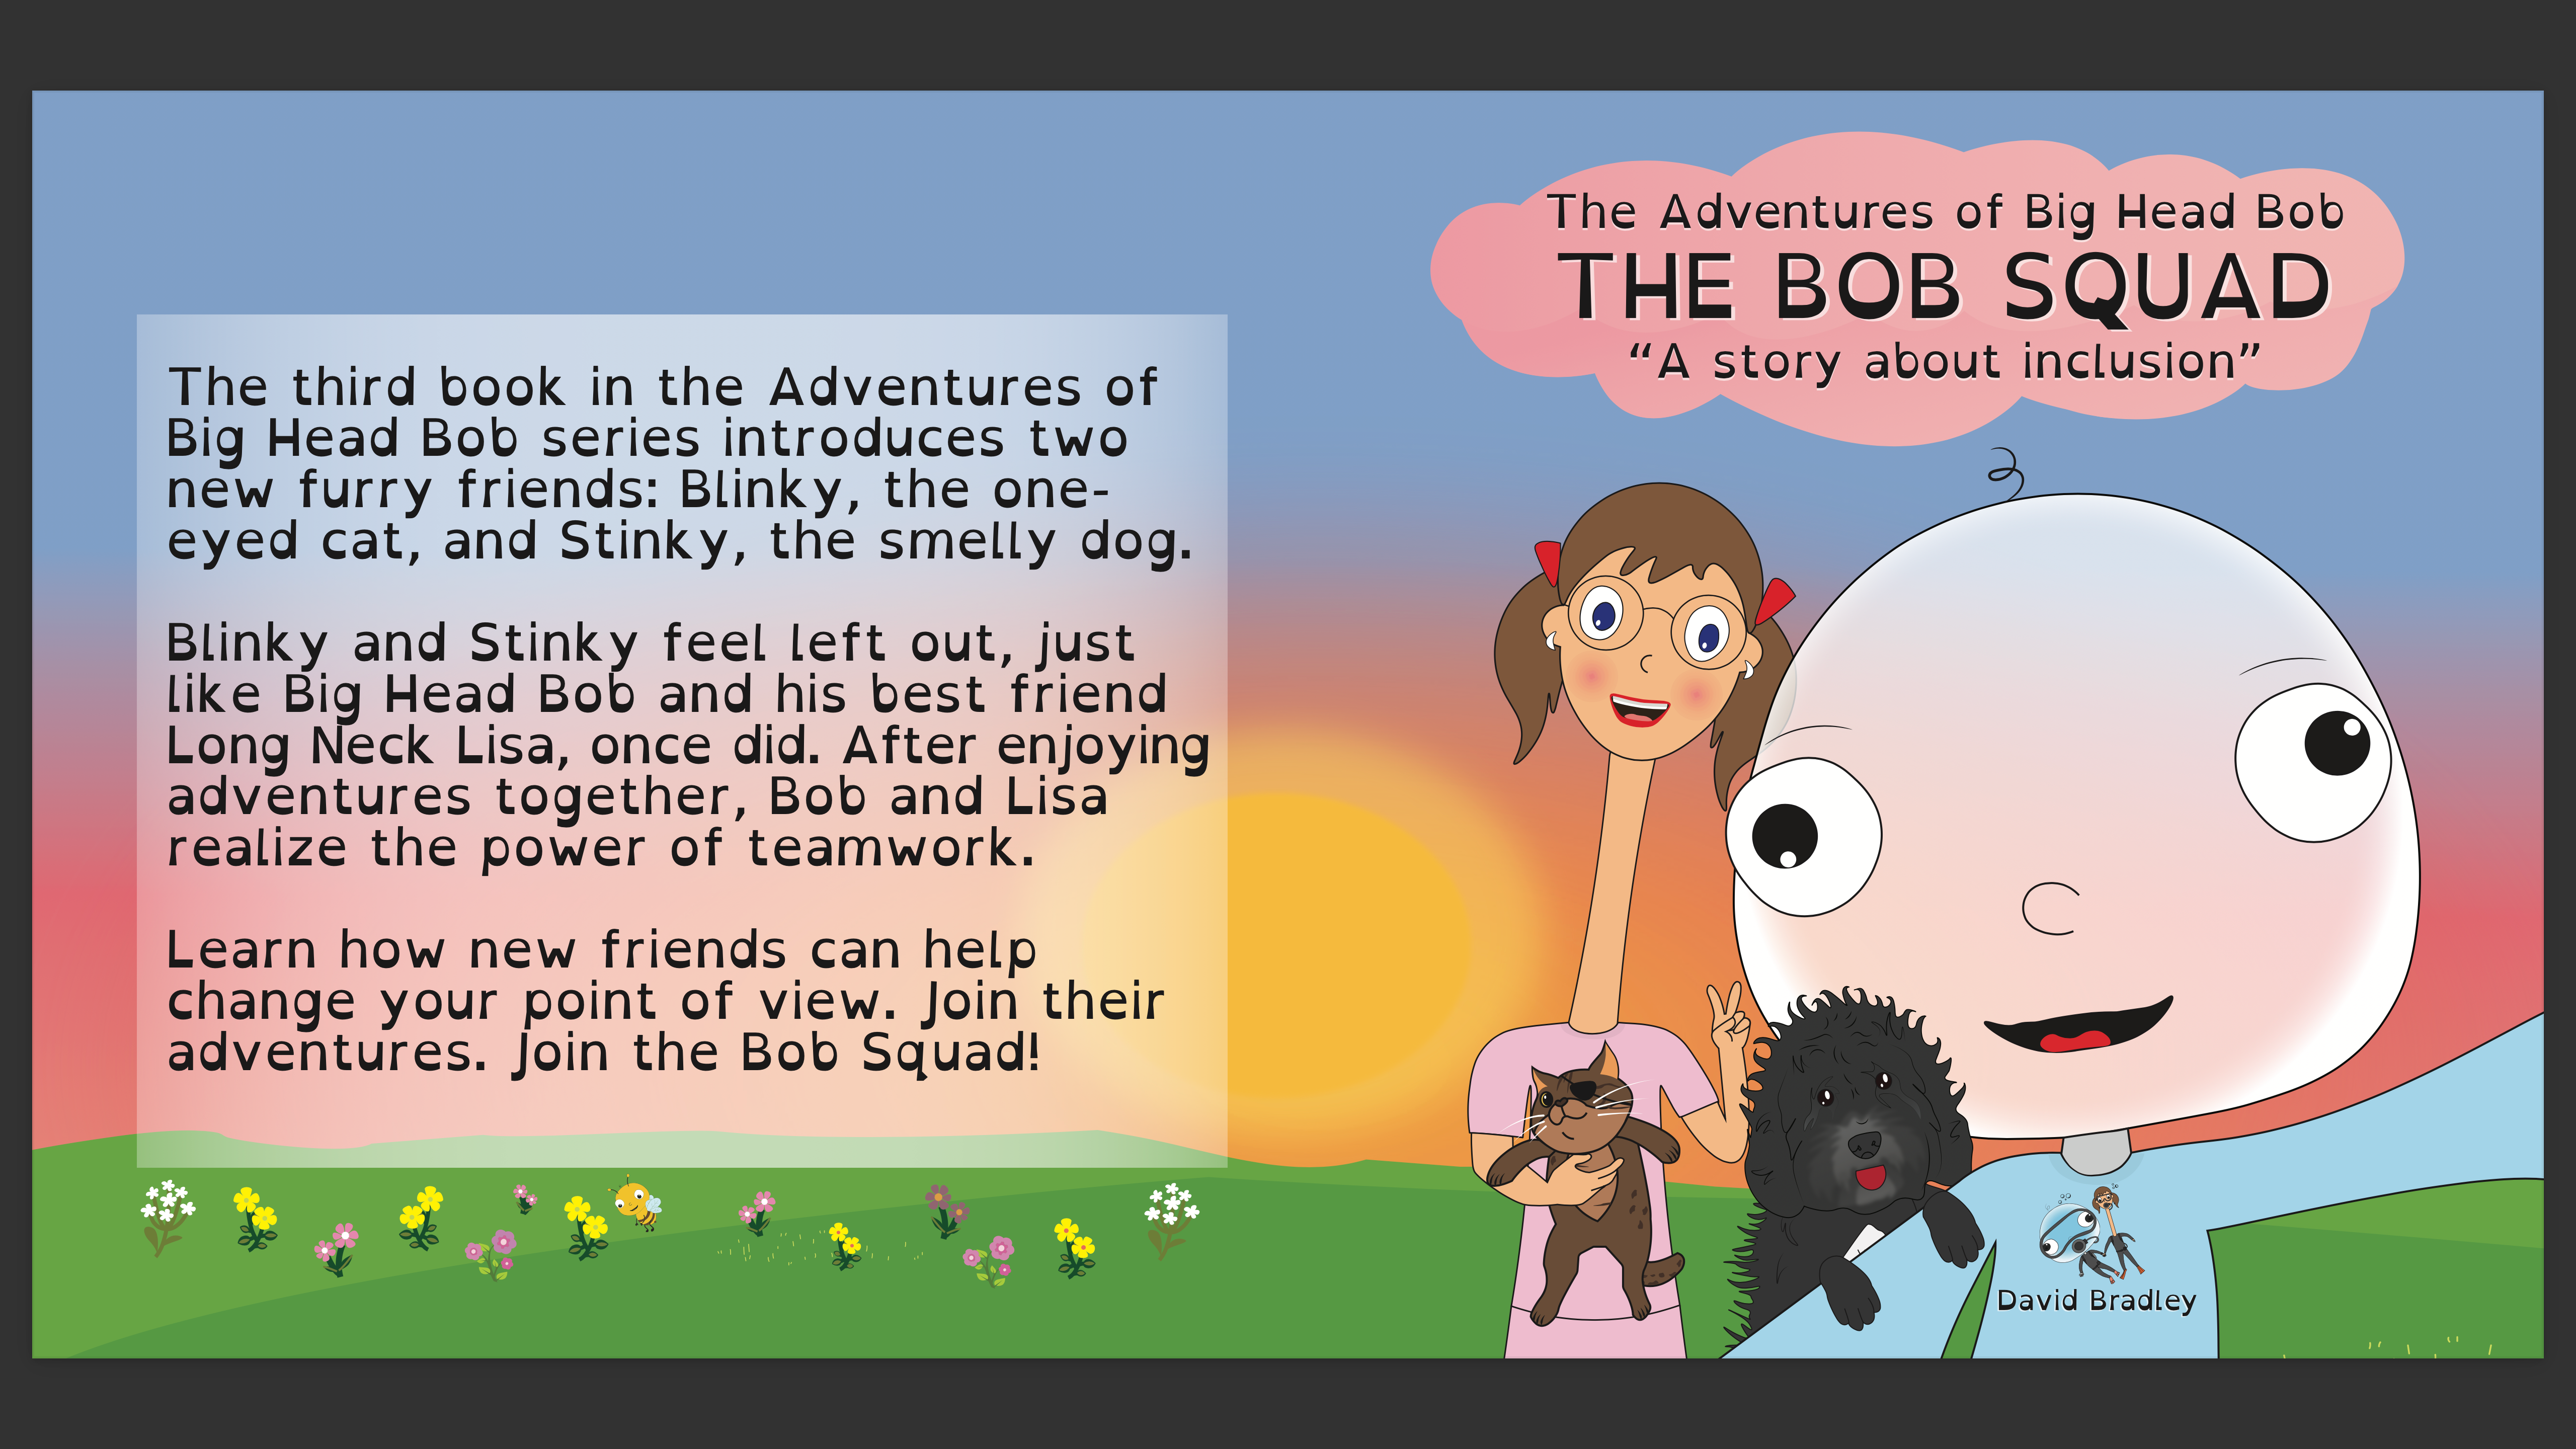 Book 3 Package - Signed Copy of Big Head Bob - The Bob Squad - A story about inclusion